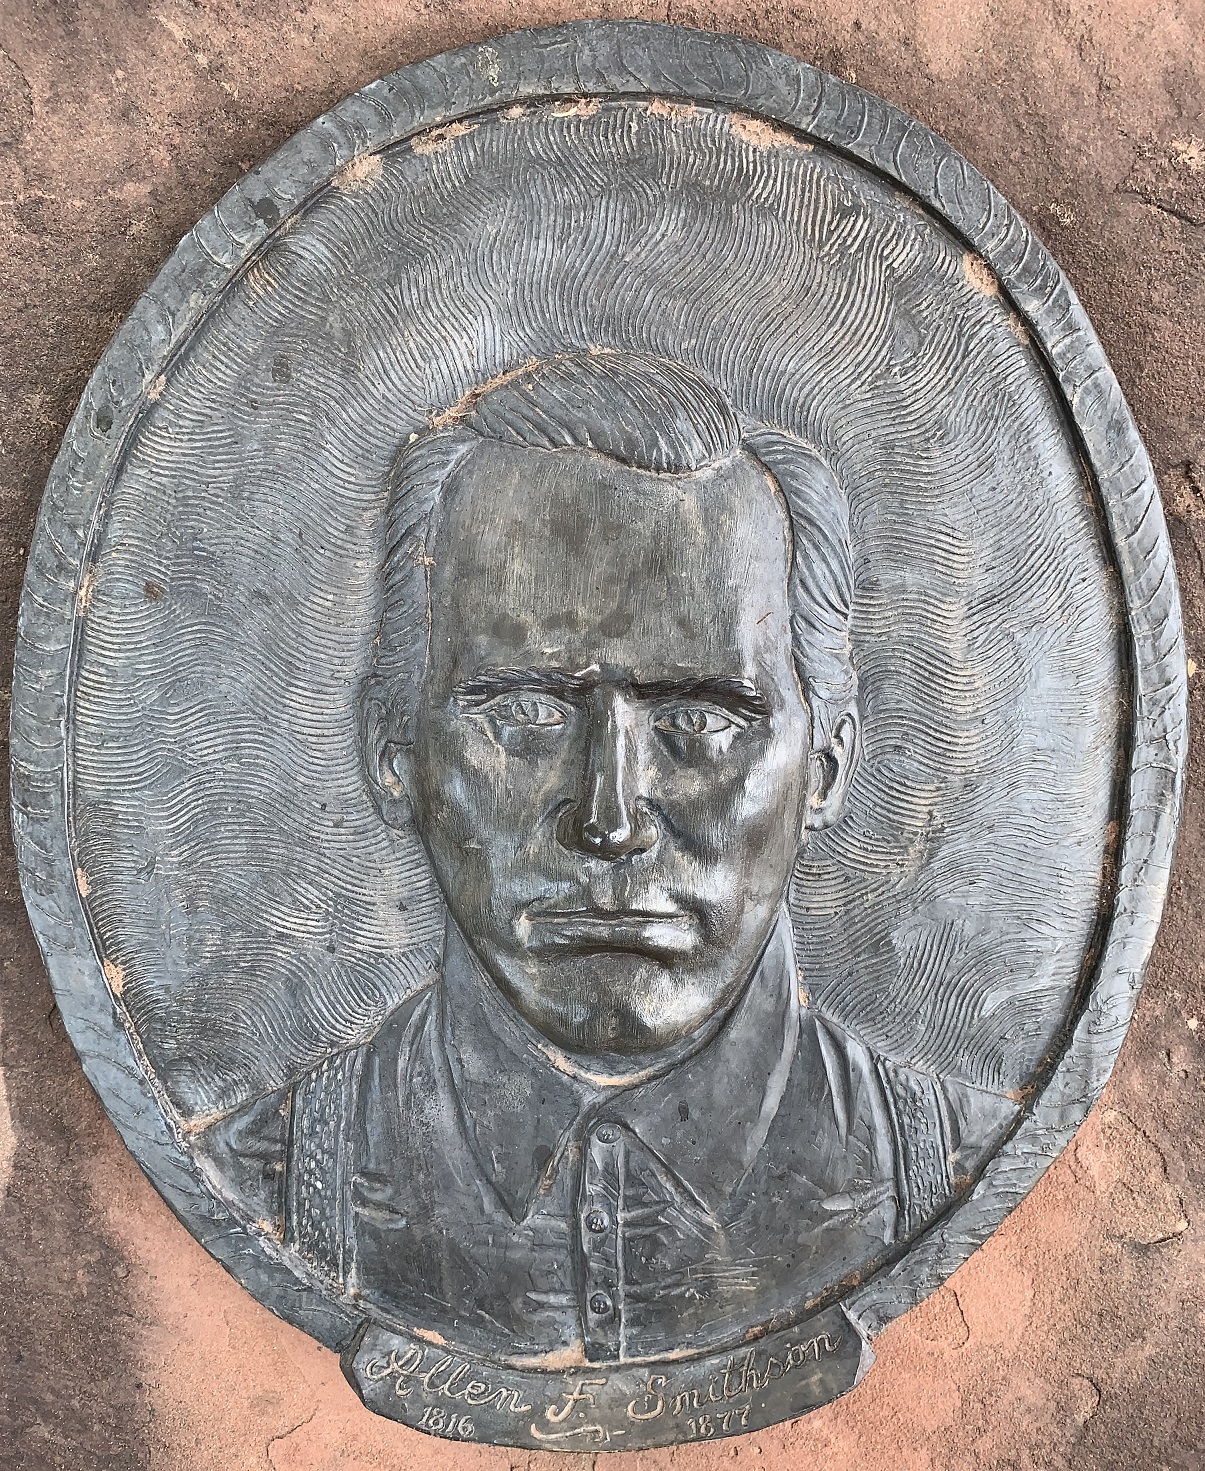 Face plaque of Allen F. Smithson at the Monument Plaza in Washington, Utah